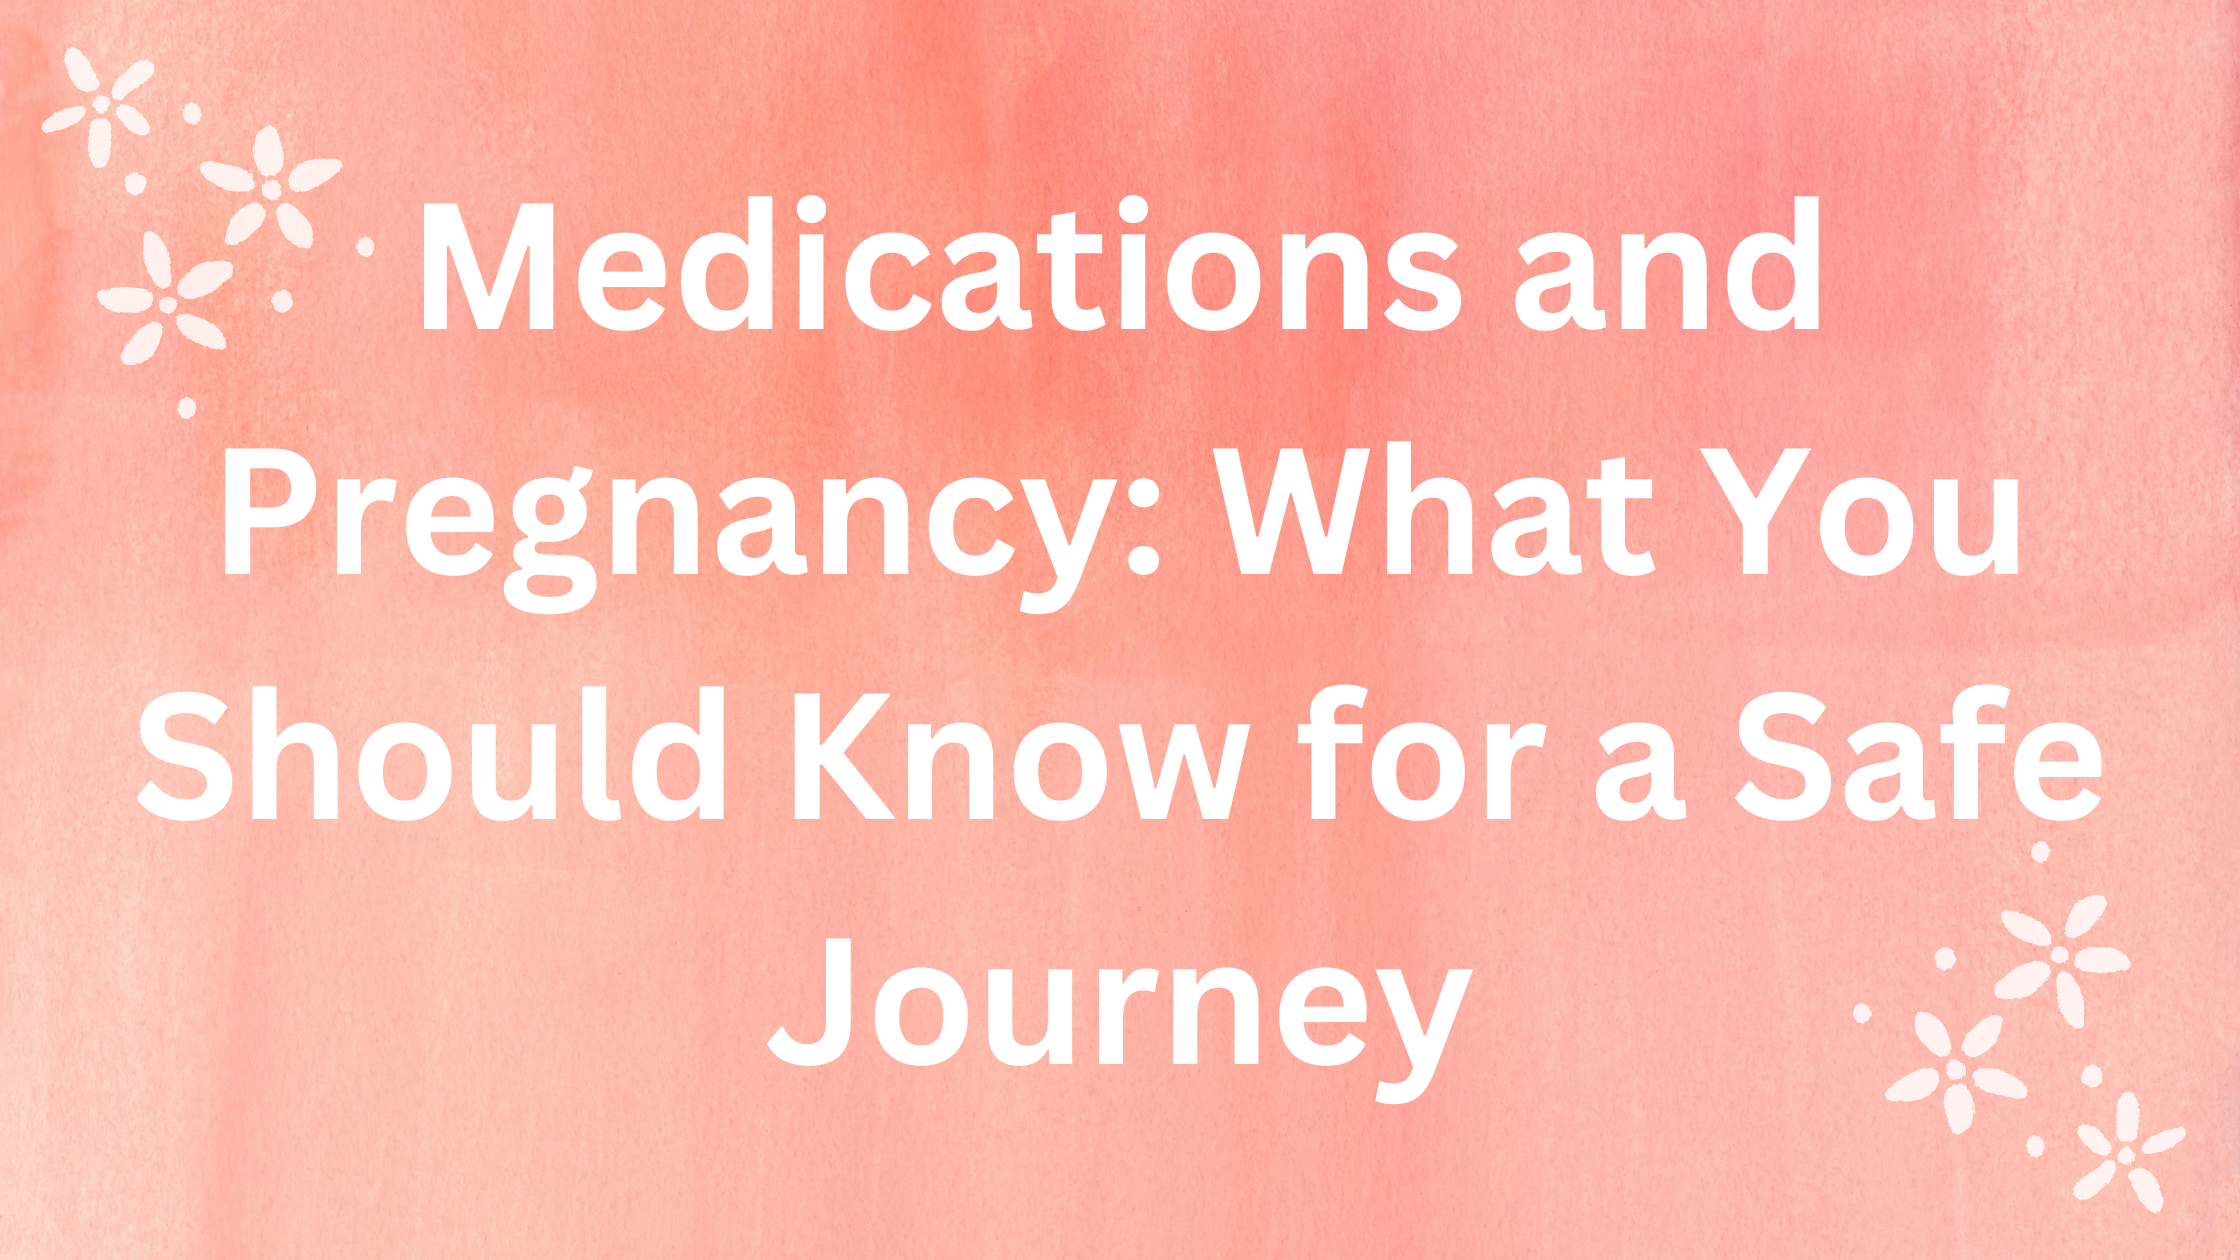 Medications and Pregnancy: What You Should Know for a Safe Journey